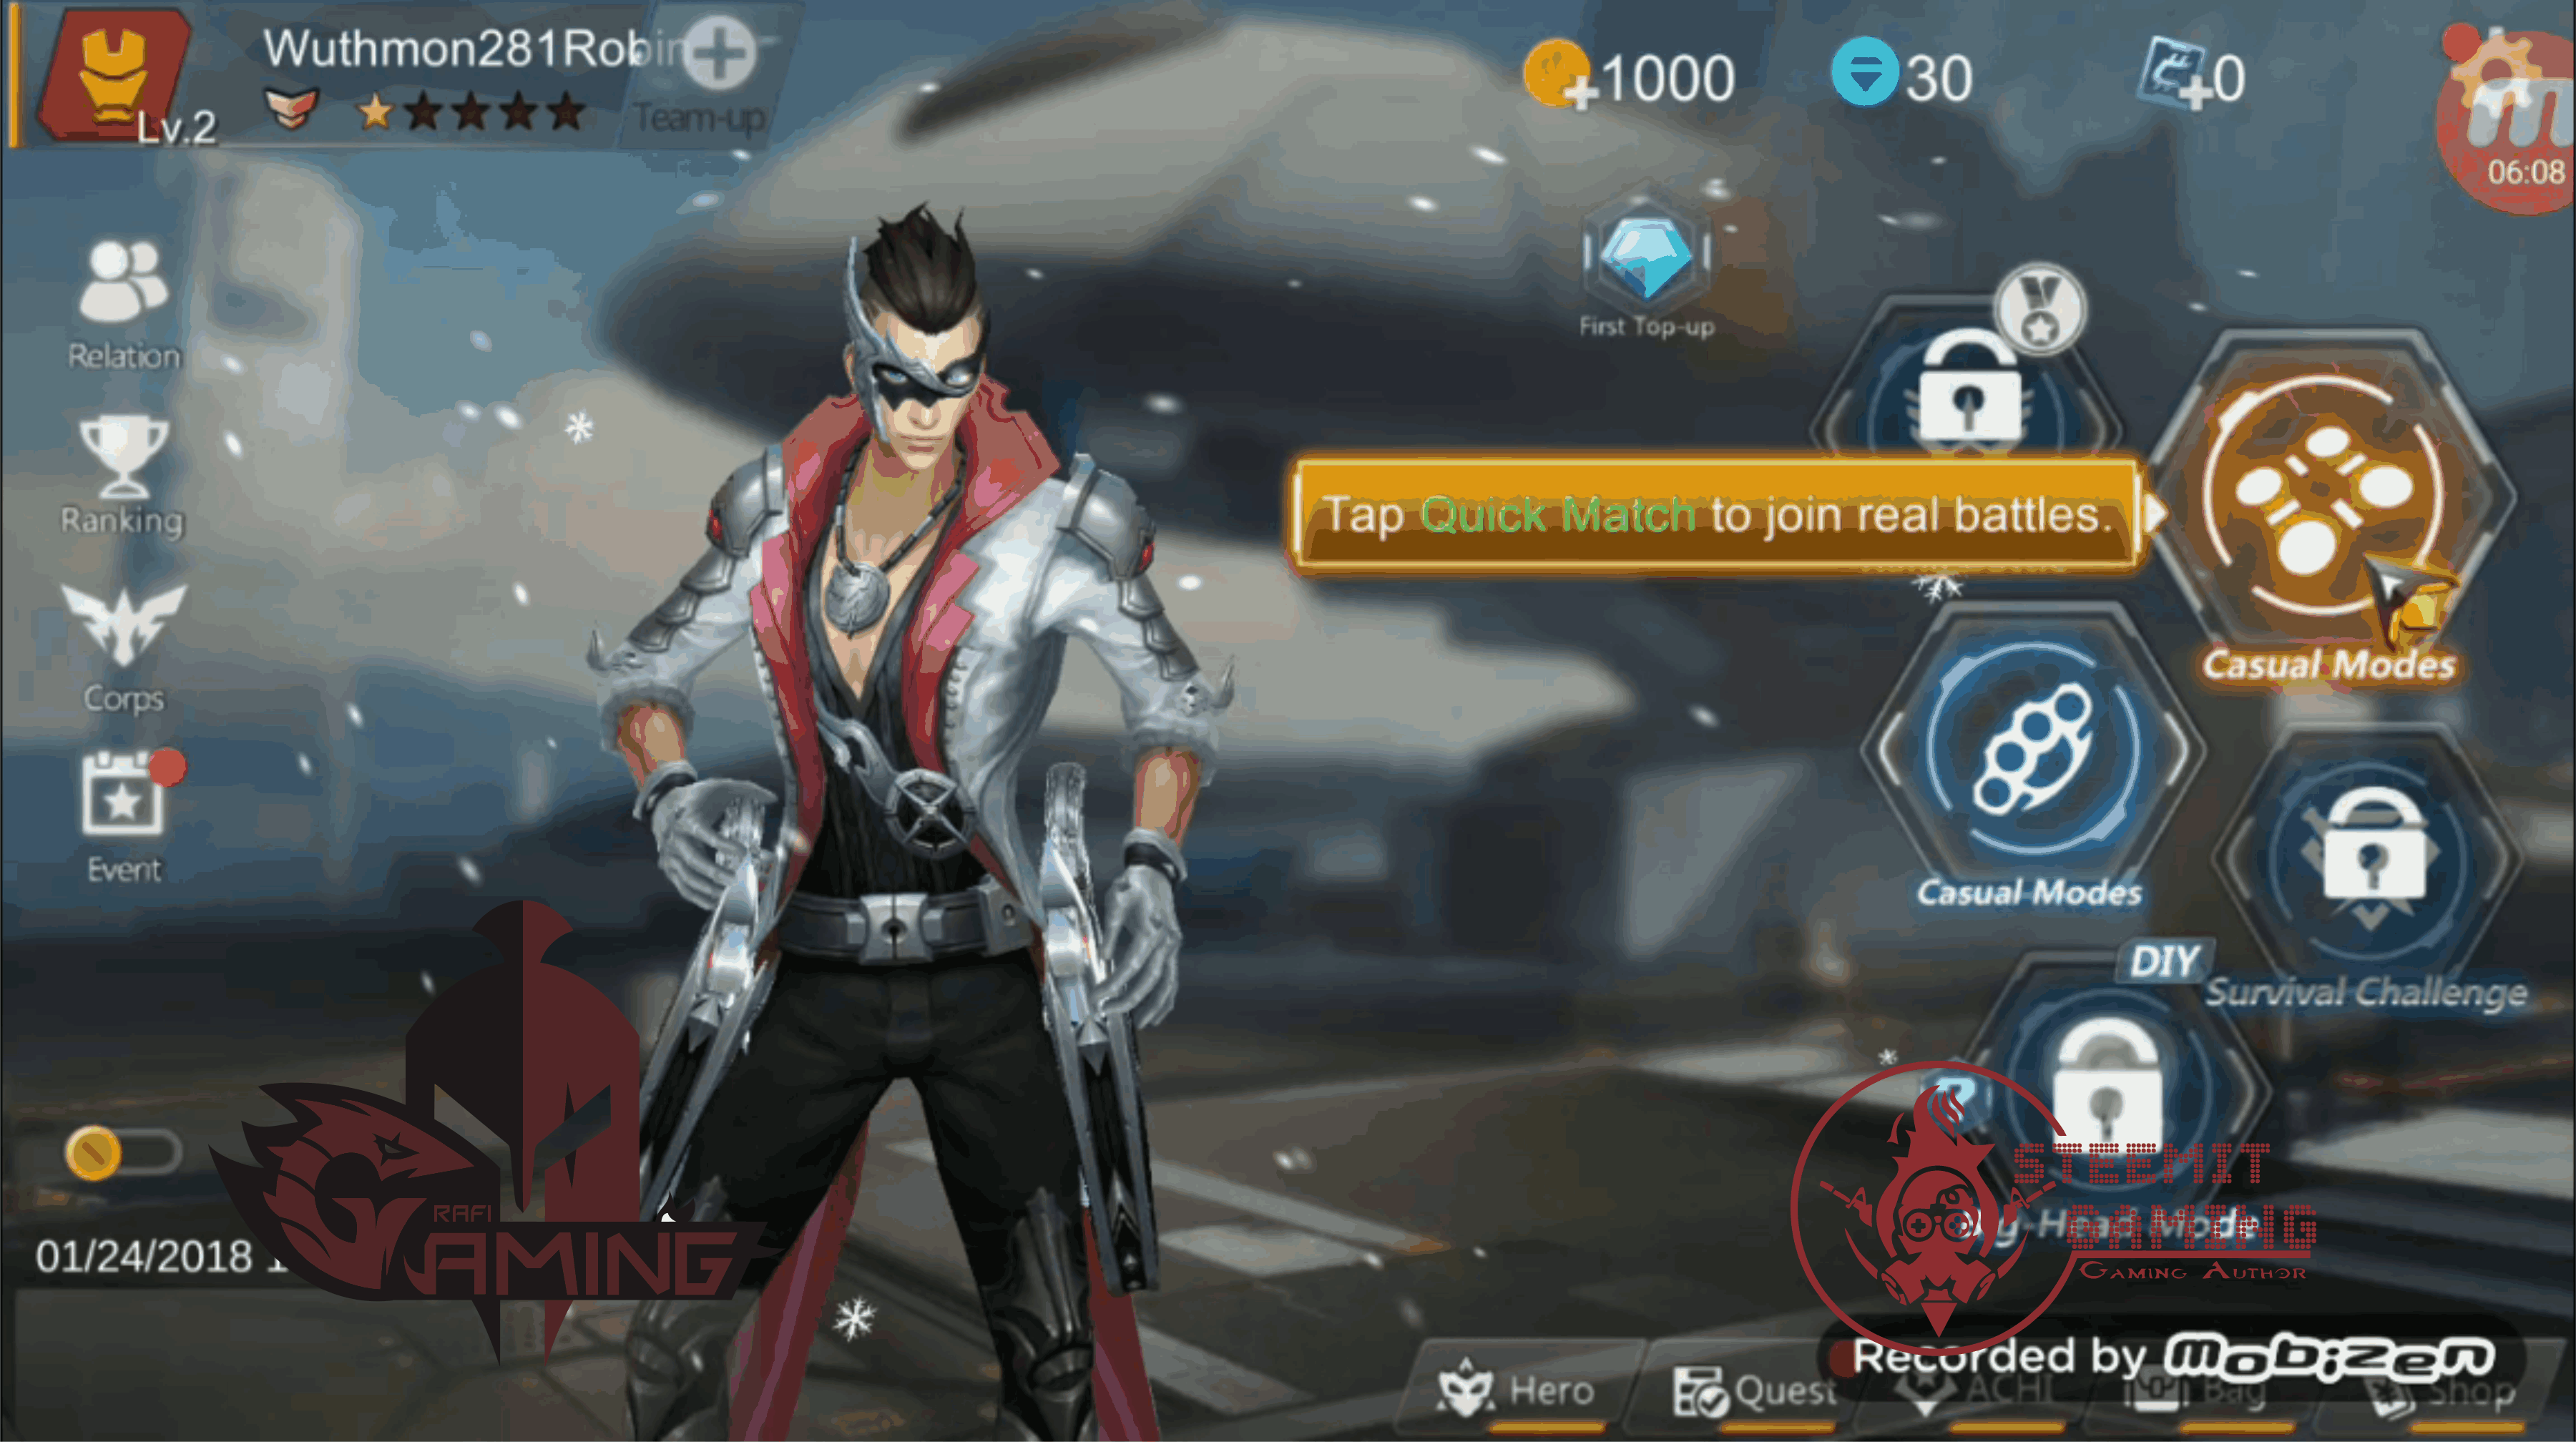 Gamingrafi A Quick Review Of The Call Of Heroes Game Free Fps Game For Android Eng